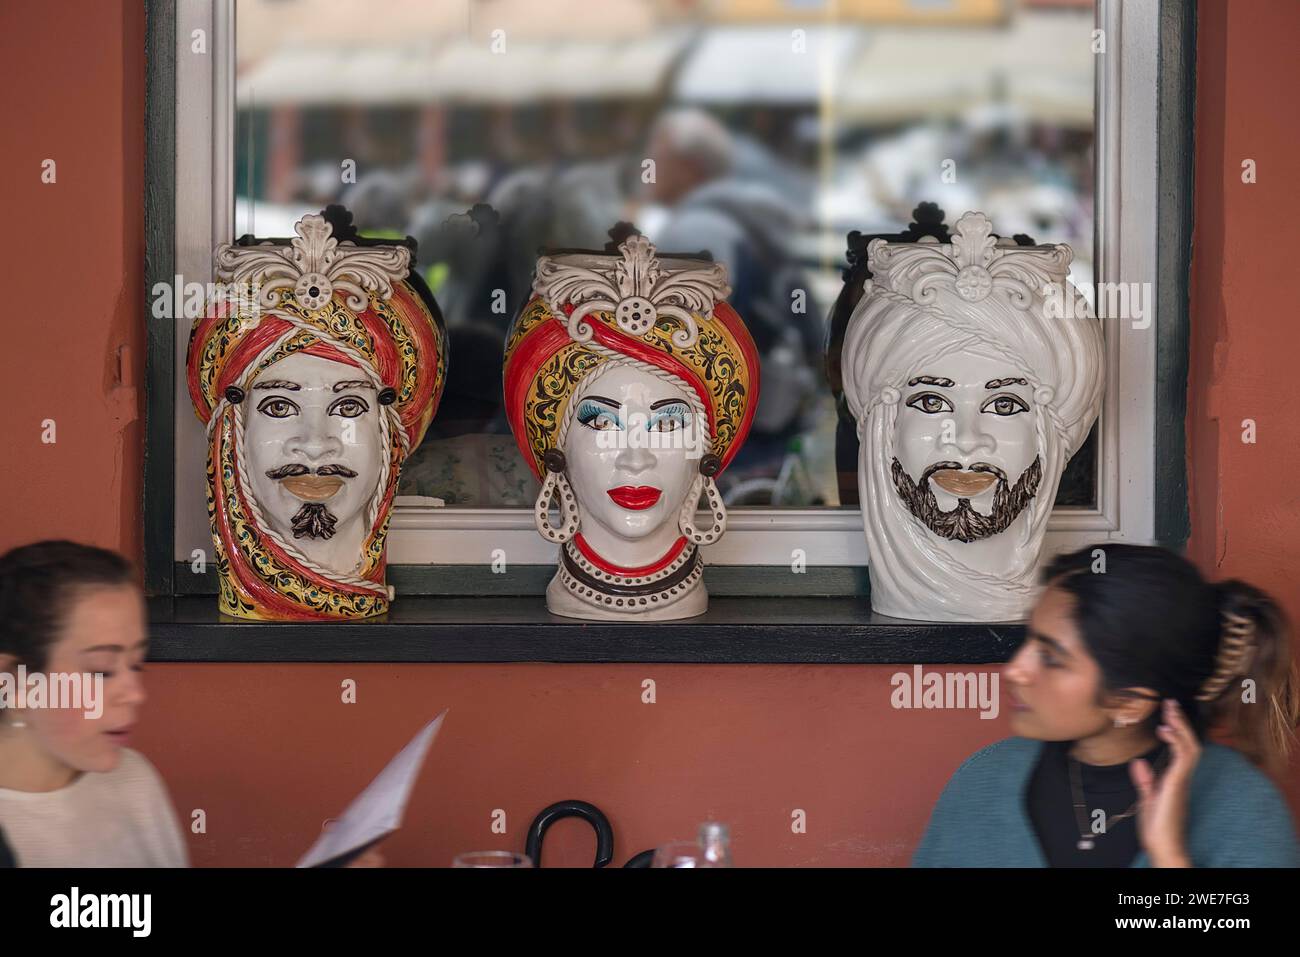 Decorative vases designed with Indian faces, in the window of an Indian restaurant, Portofino, Italy Stock Photo